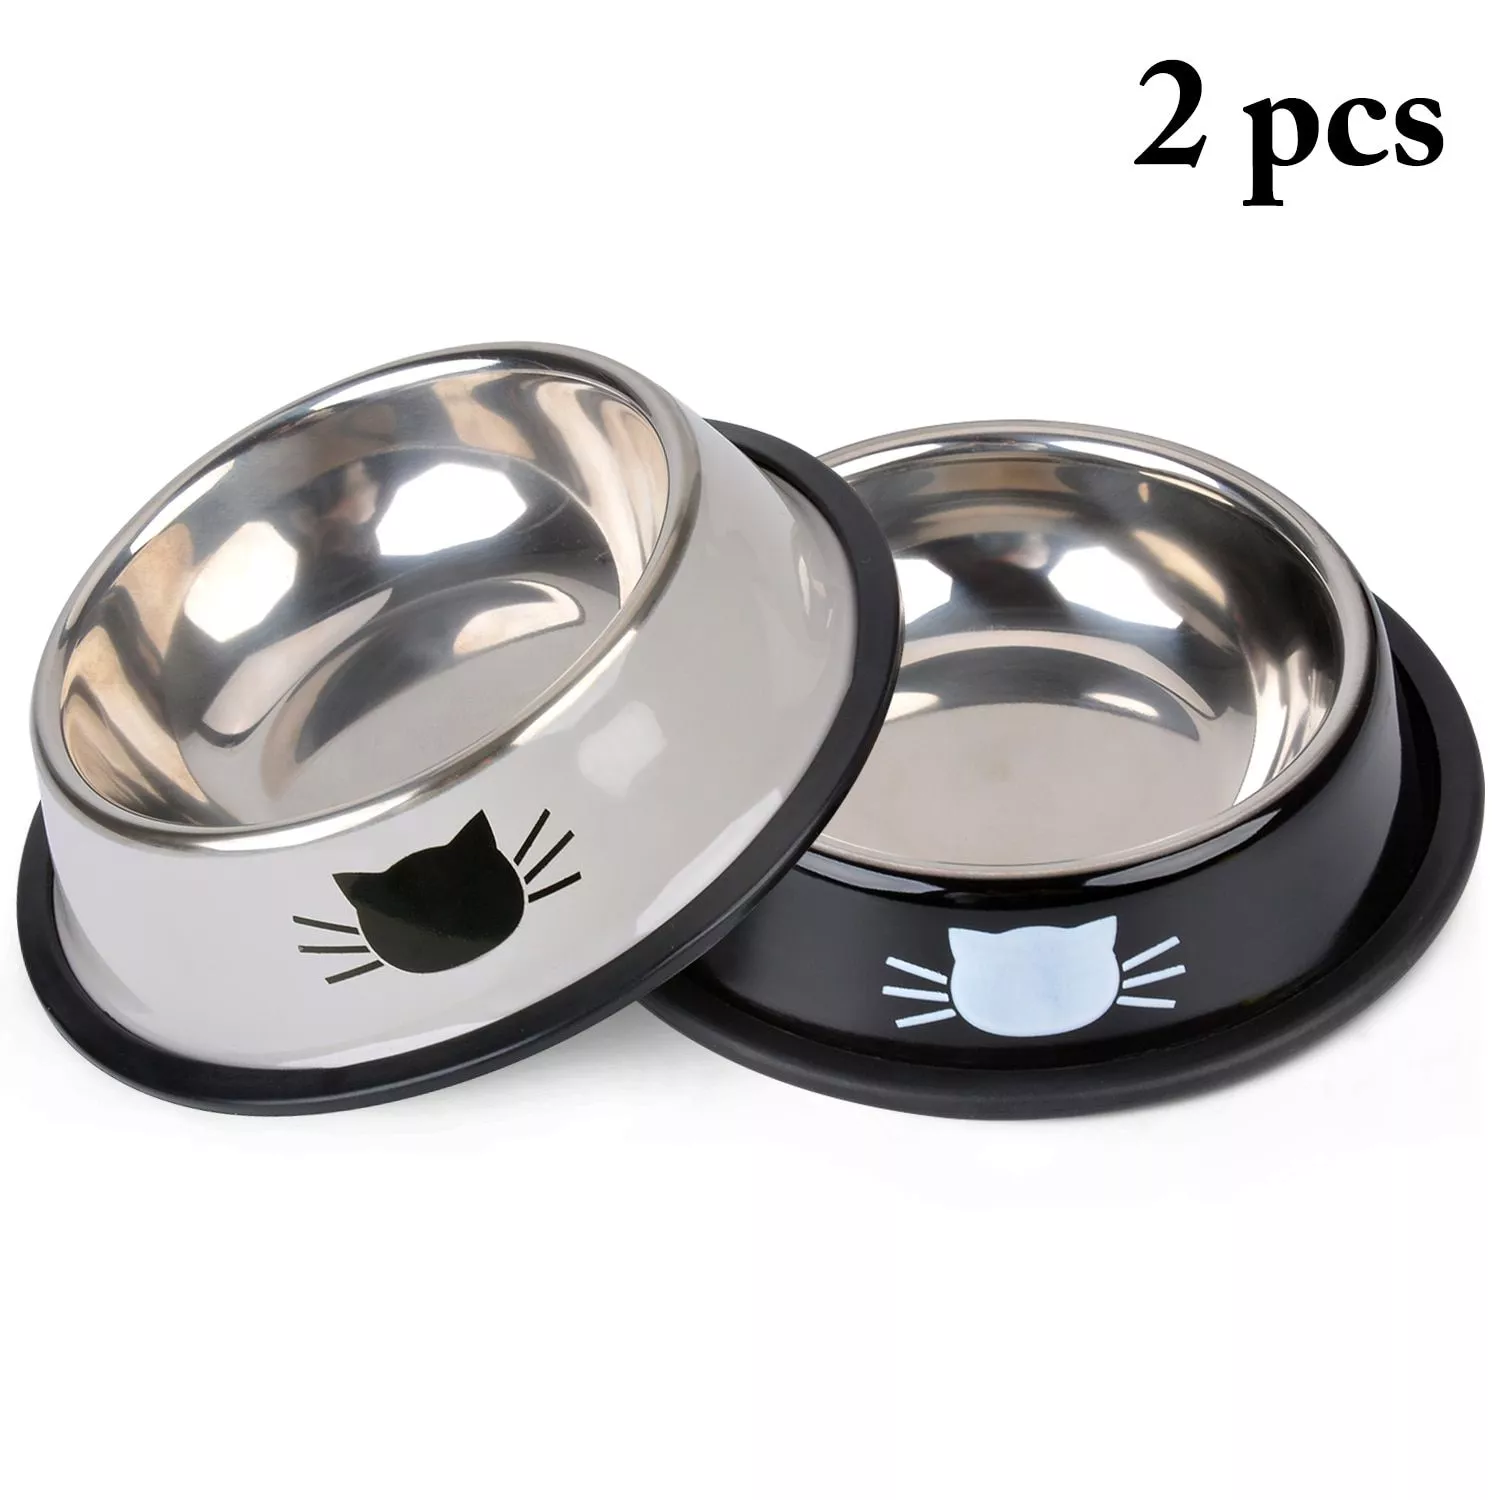 New-Pet-Product-For-Dog-Cat-Bowl-Stainless-Steel-Anti-Skid-Pet-Dog-Cat-Food-Water-Bowl-Pet-Feeding-B-32967657250-2